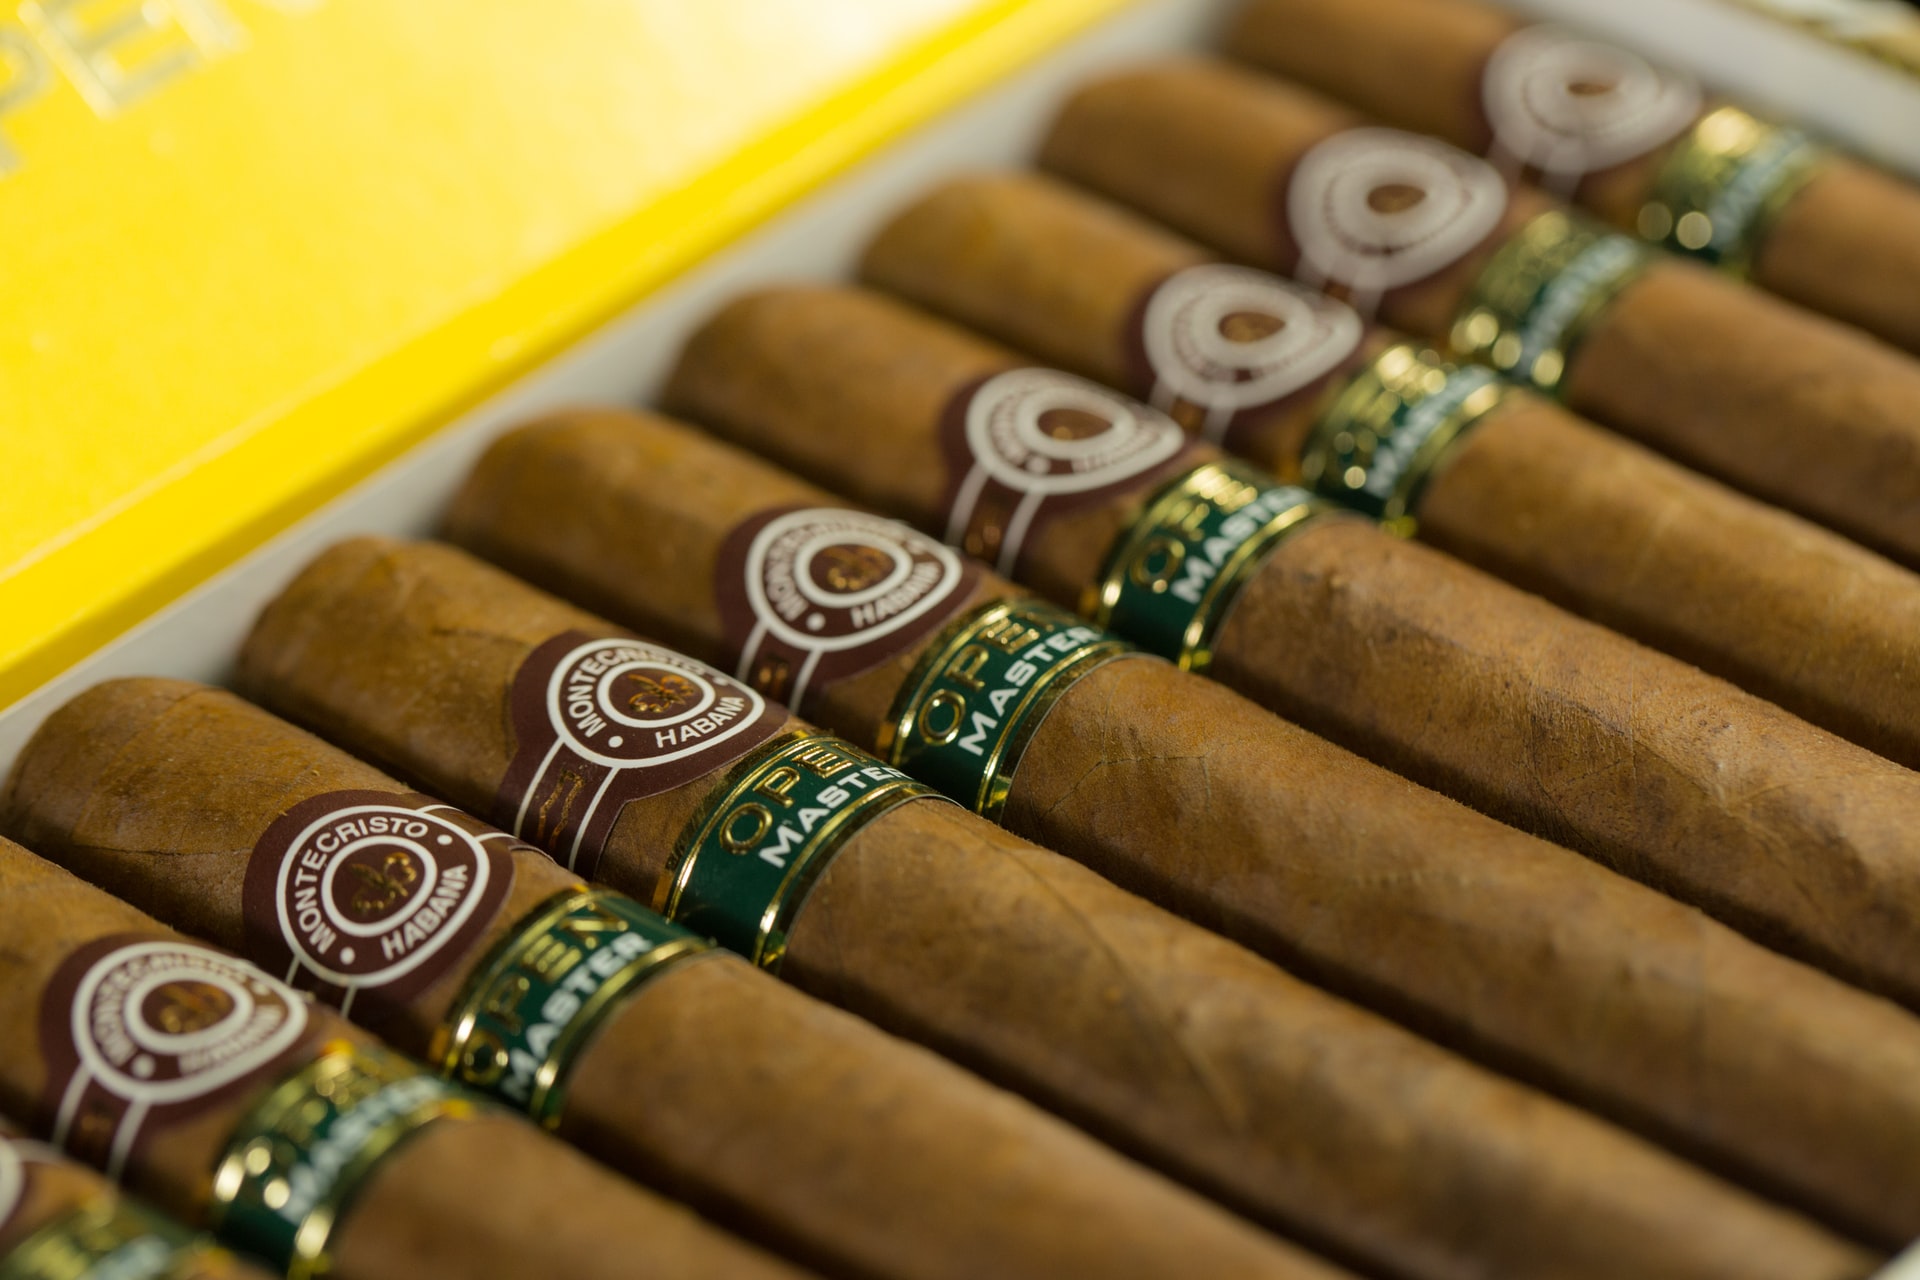 Wholesale cigar boxes are affordable and cost-effective